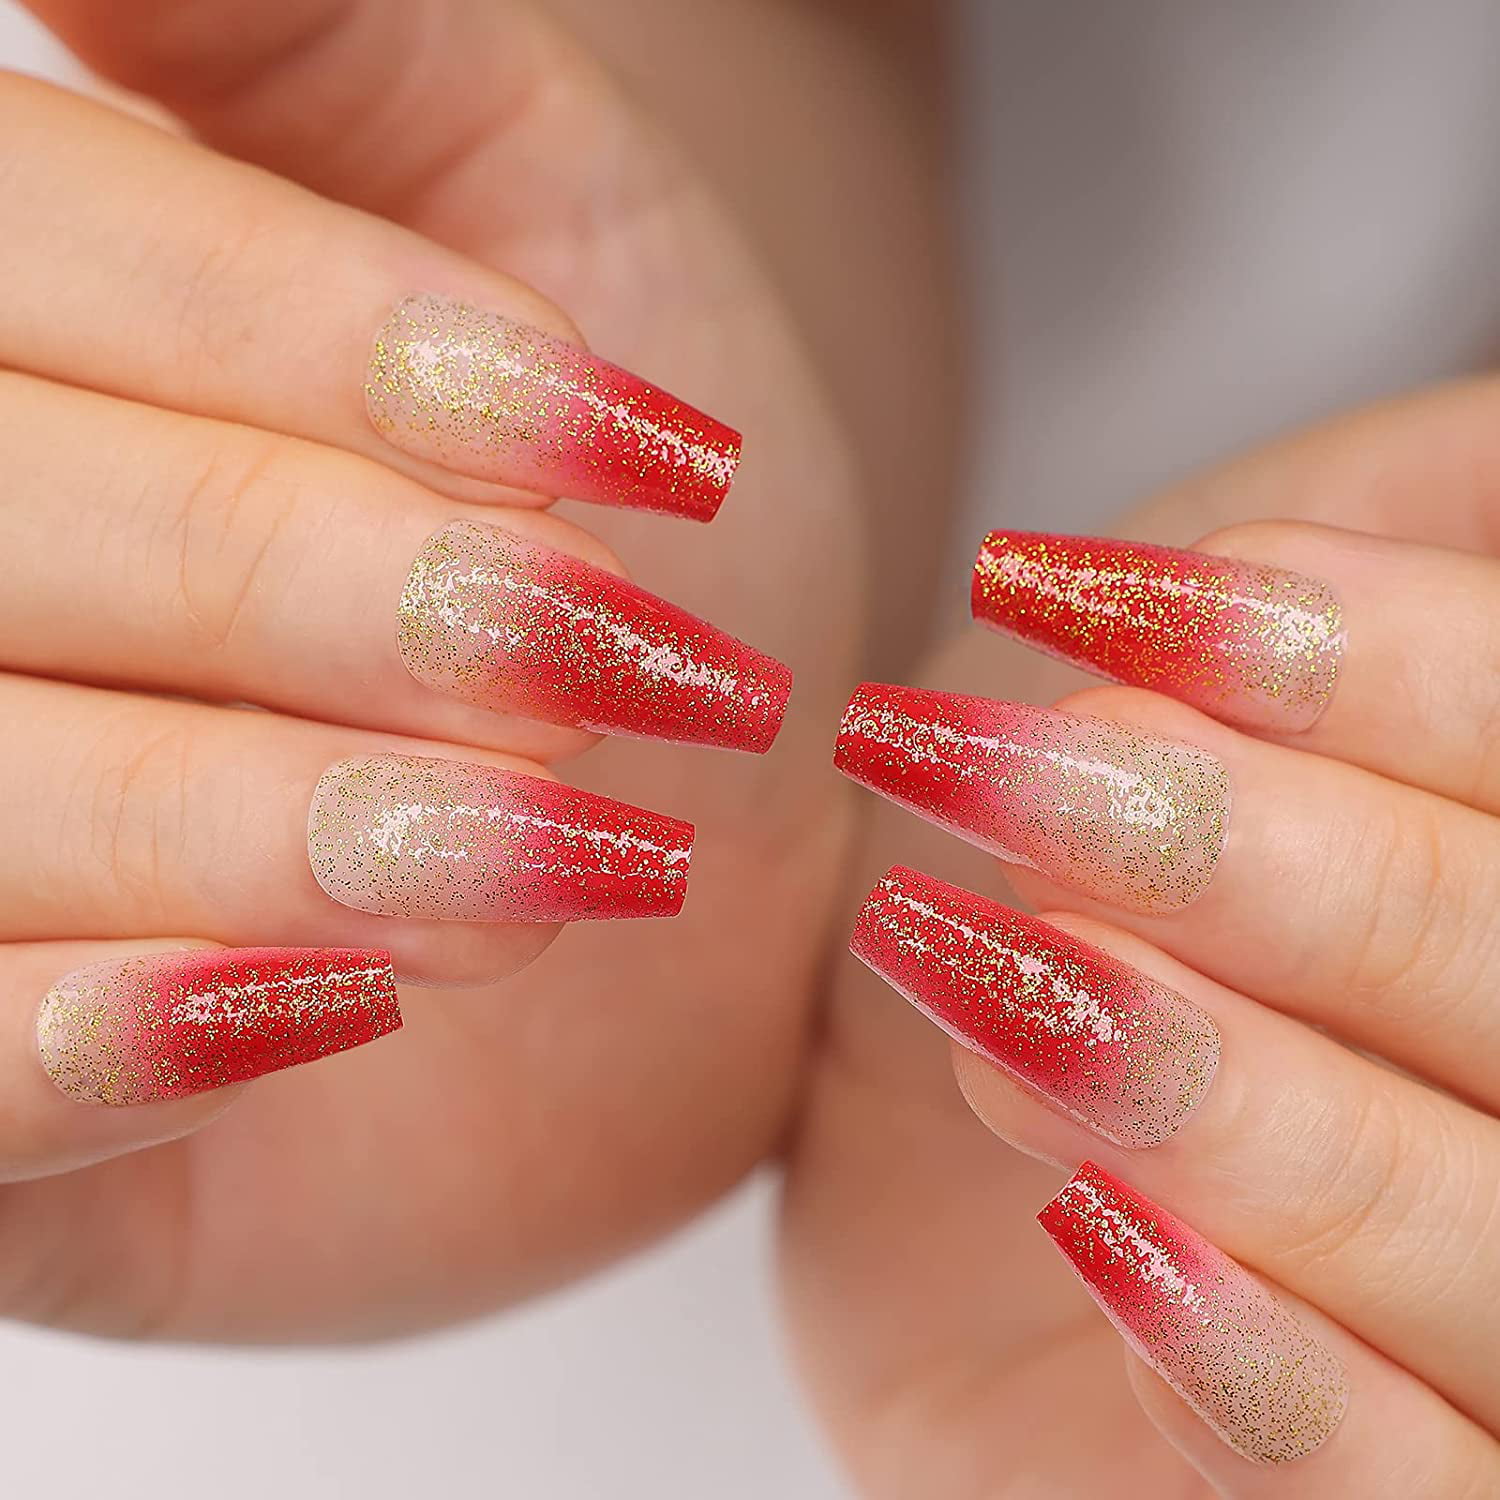 25 Pretty Coffin Baddie Red Acrylic Nails That You Can Try